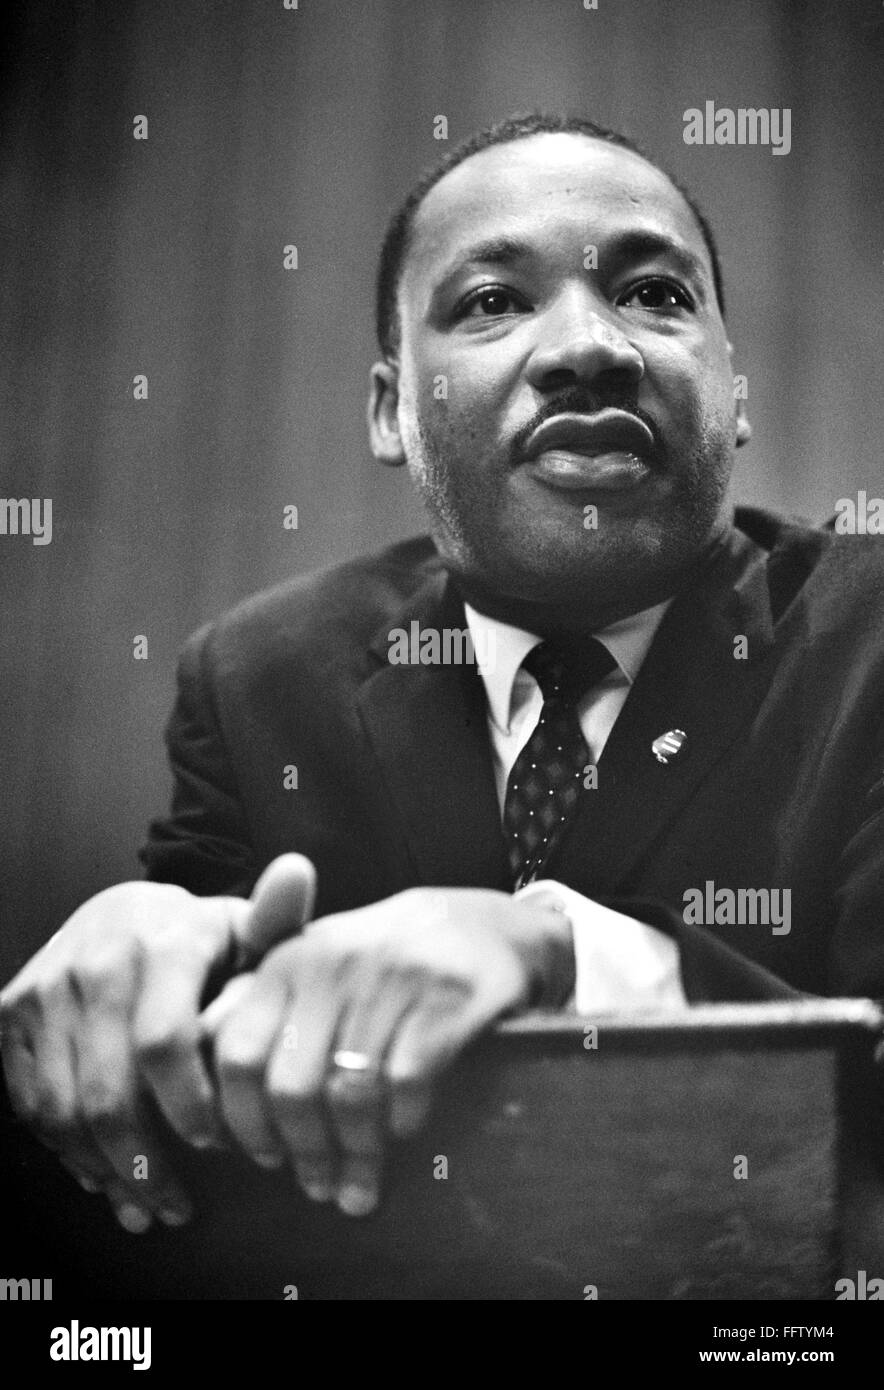 MARTIN LUTHER KING, JR. /n(1929-1968). American cleric and civil rights leader. Photographed by Marion S. Trikosko, 26 March 1964. Stock Photo